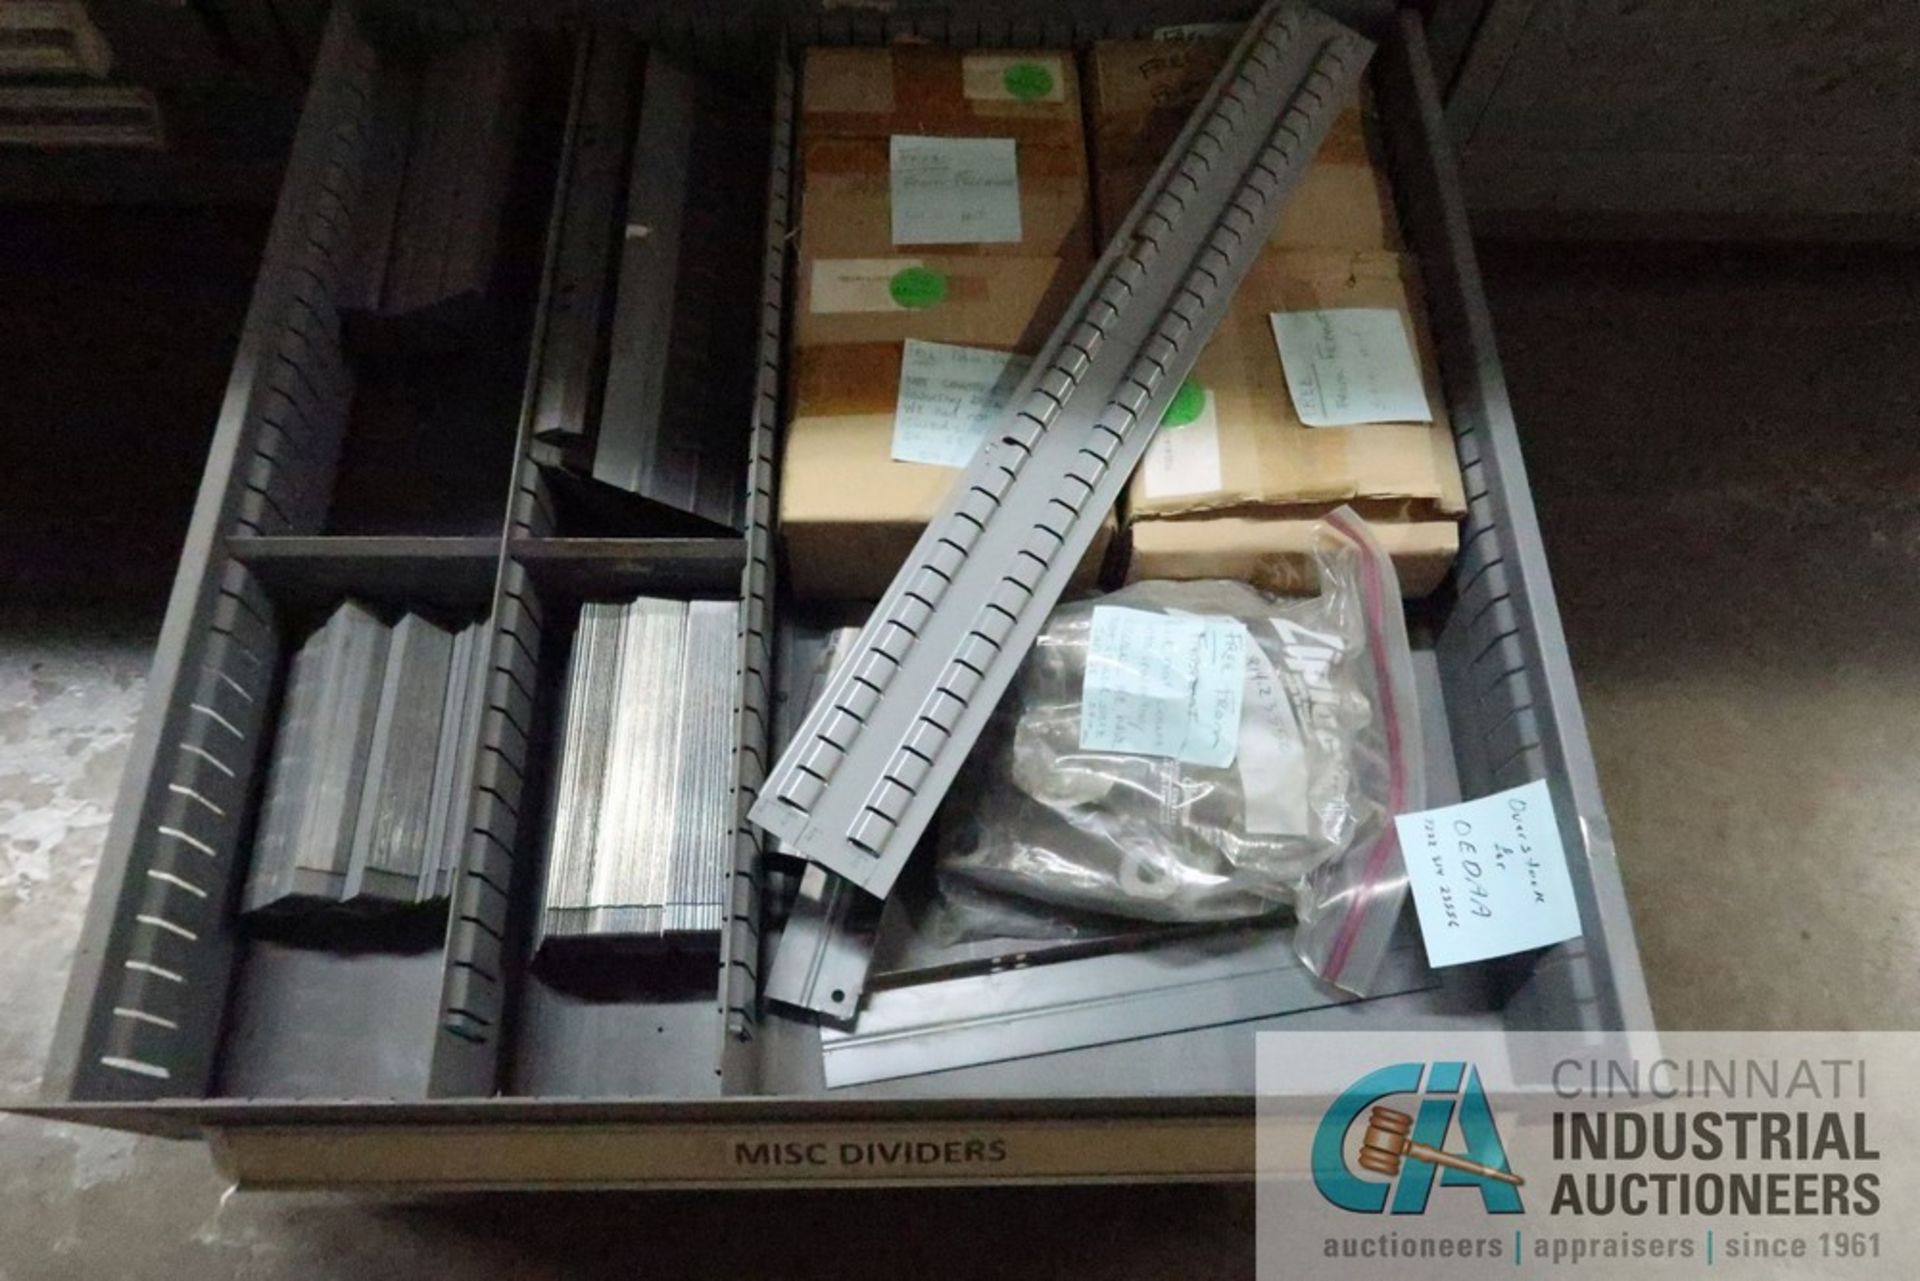 11-DRAWER VIDMAR CABINET WITH CONTENTS INCLUDING MISCELLANEOUS STANLEY AND VIDMAR DIVIDERS, FACE - Image 12 of 12